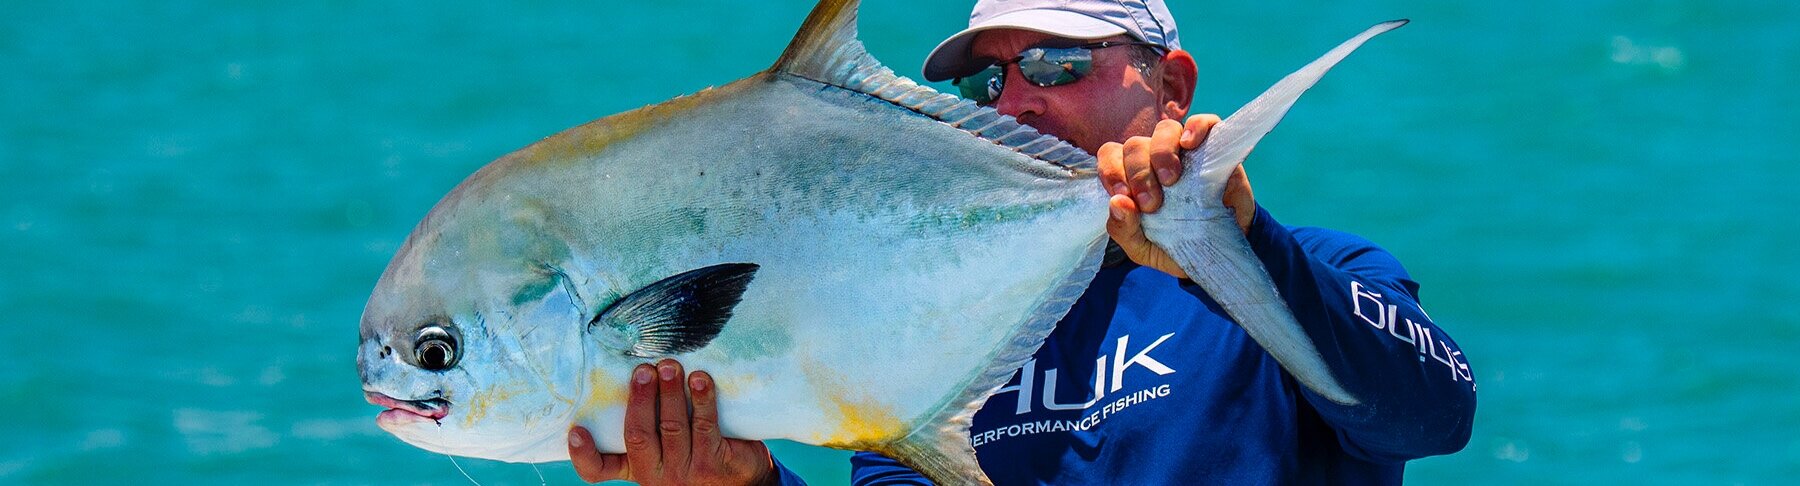 Permit Fishing 101 - How To Catch A Permit On Fly Featuring Capt